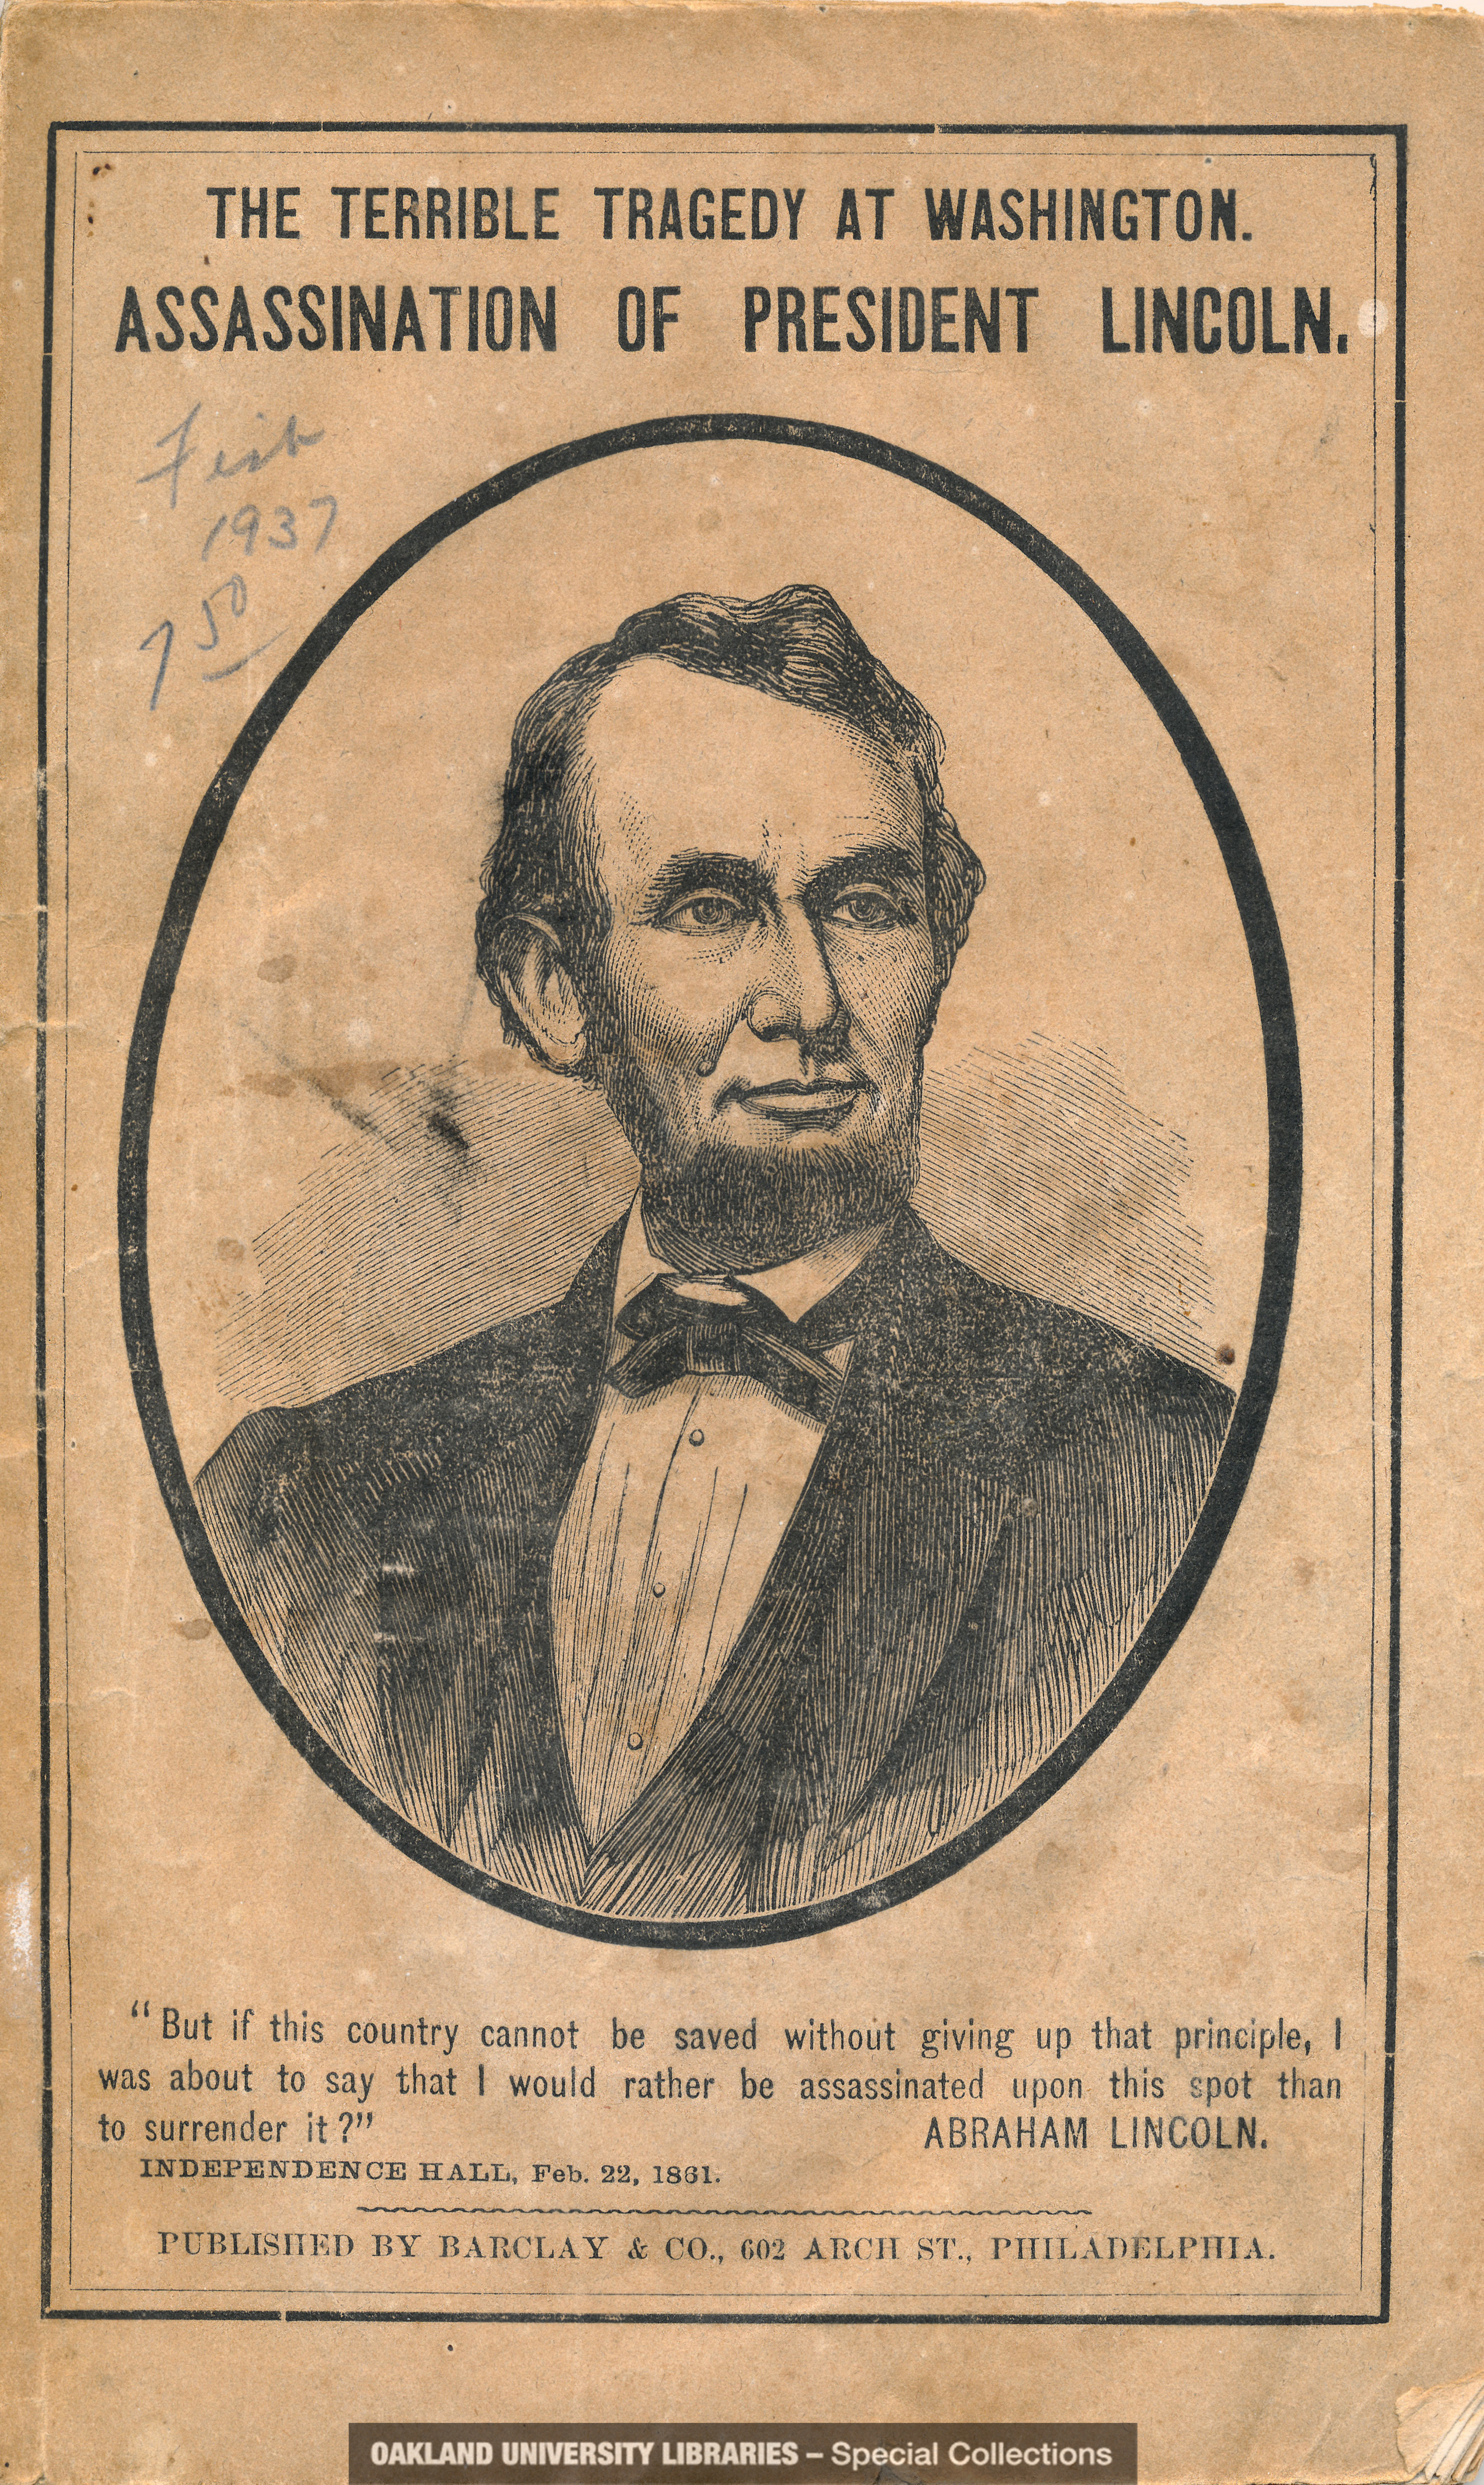 The Terrible Tragedy at Washington: Assassination of President Lincoln